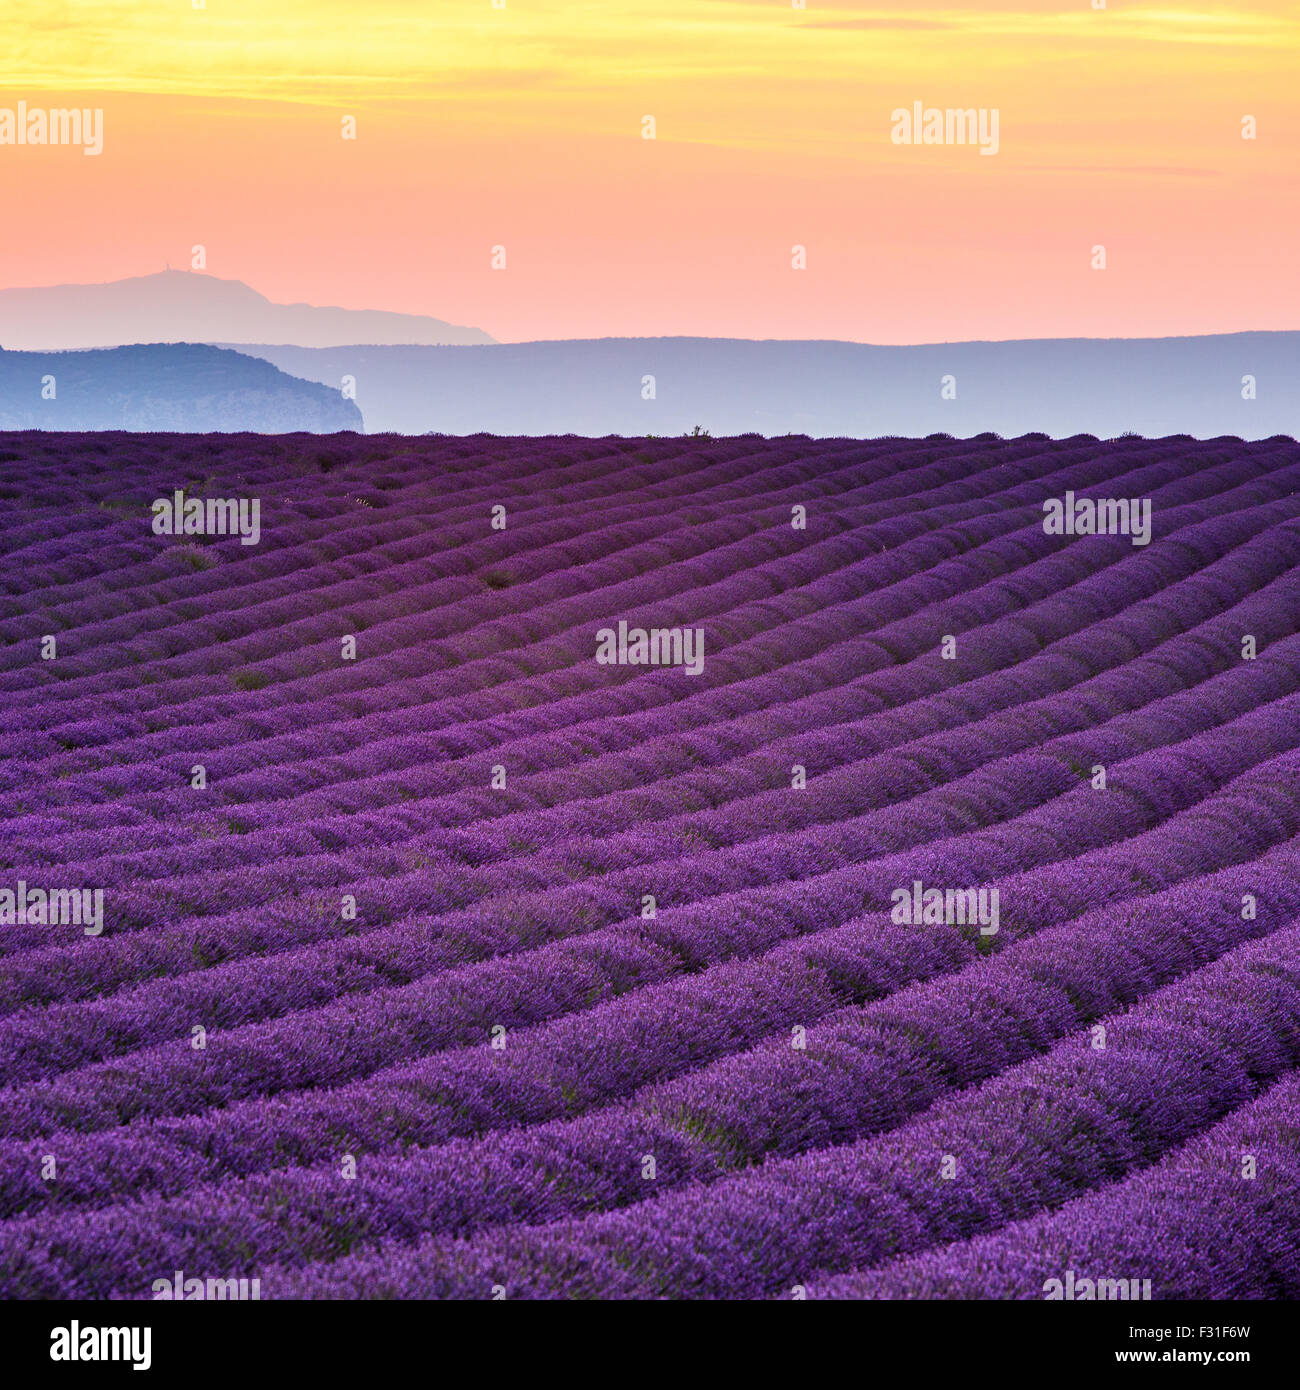 Provence, Valensole Plateau, Lavender field in bloom Stock Photo